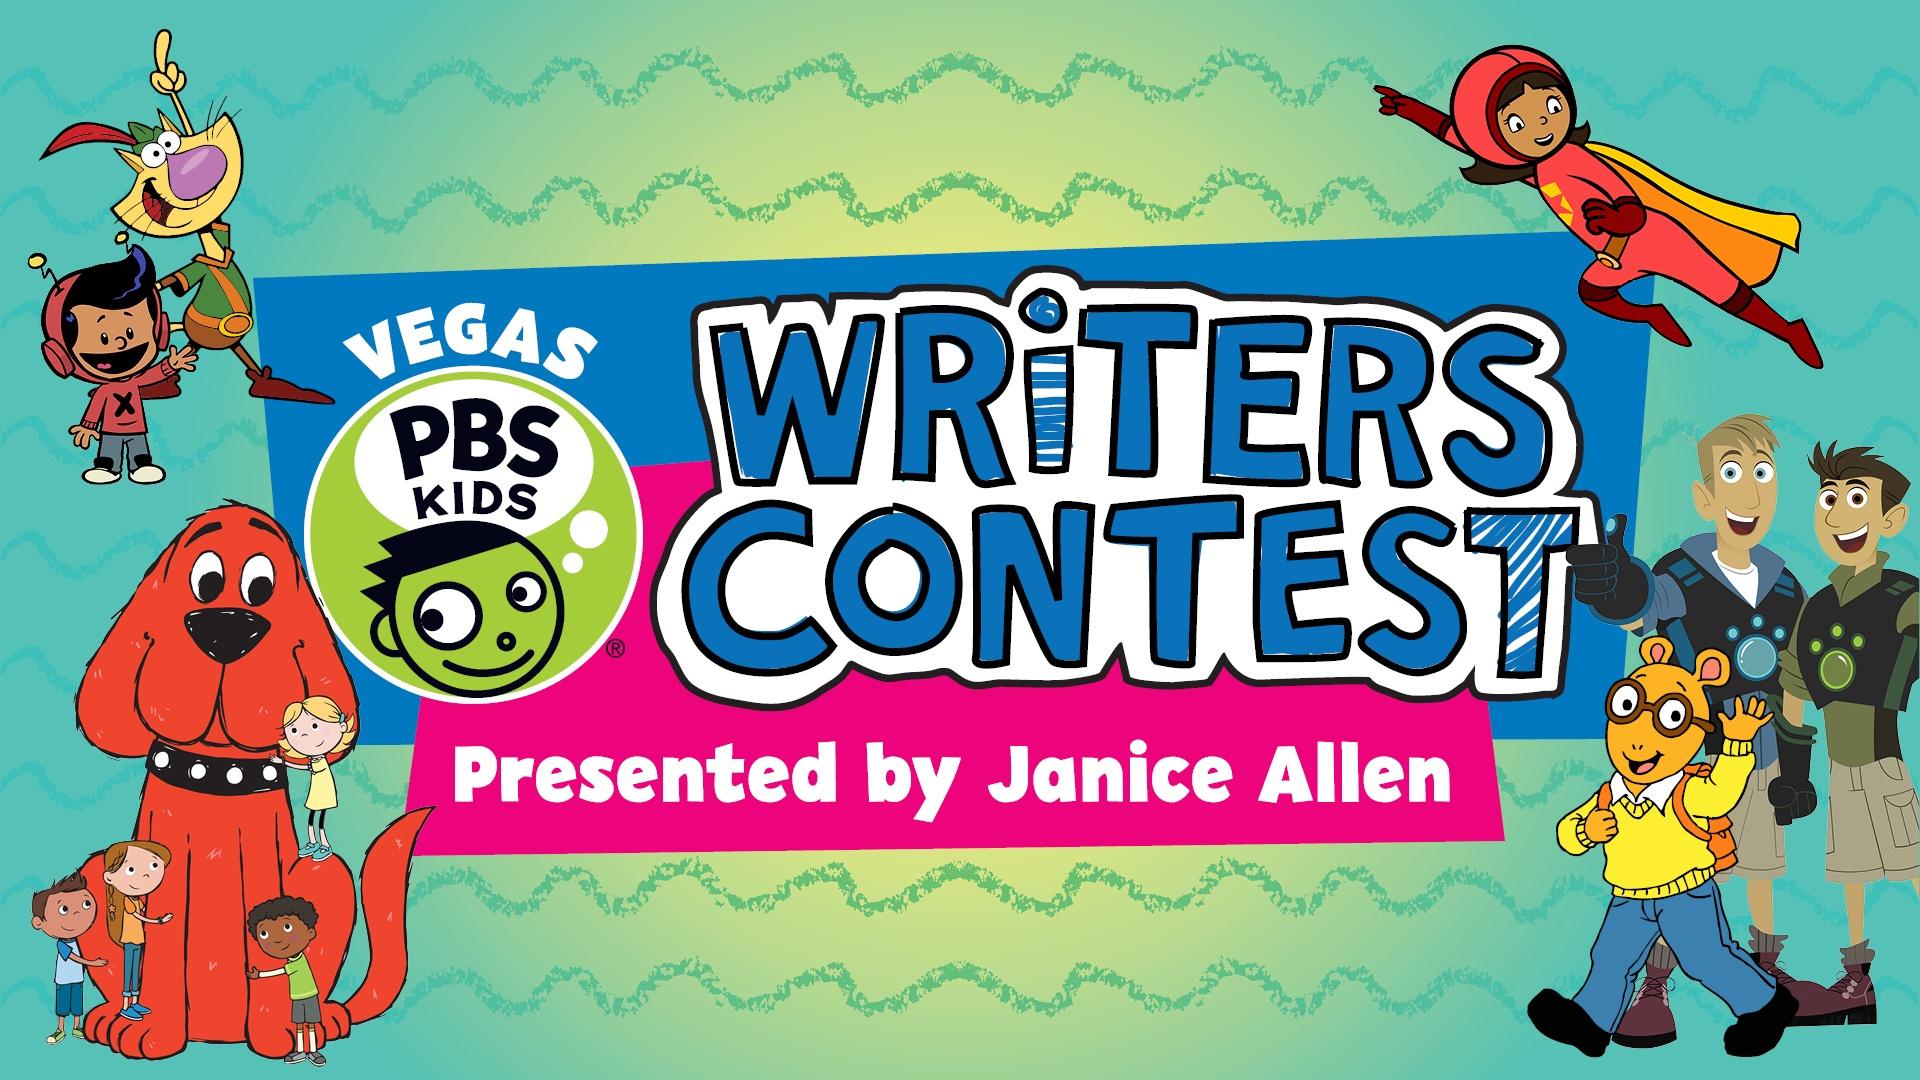 VEGAS PBS KIDS Writers Contest Presented by Janice Allen